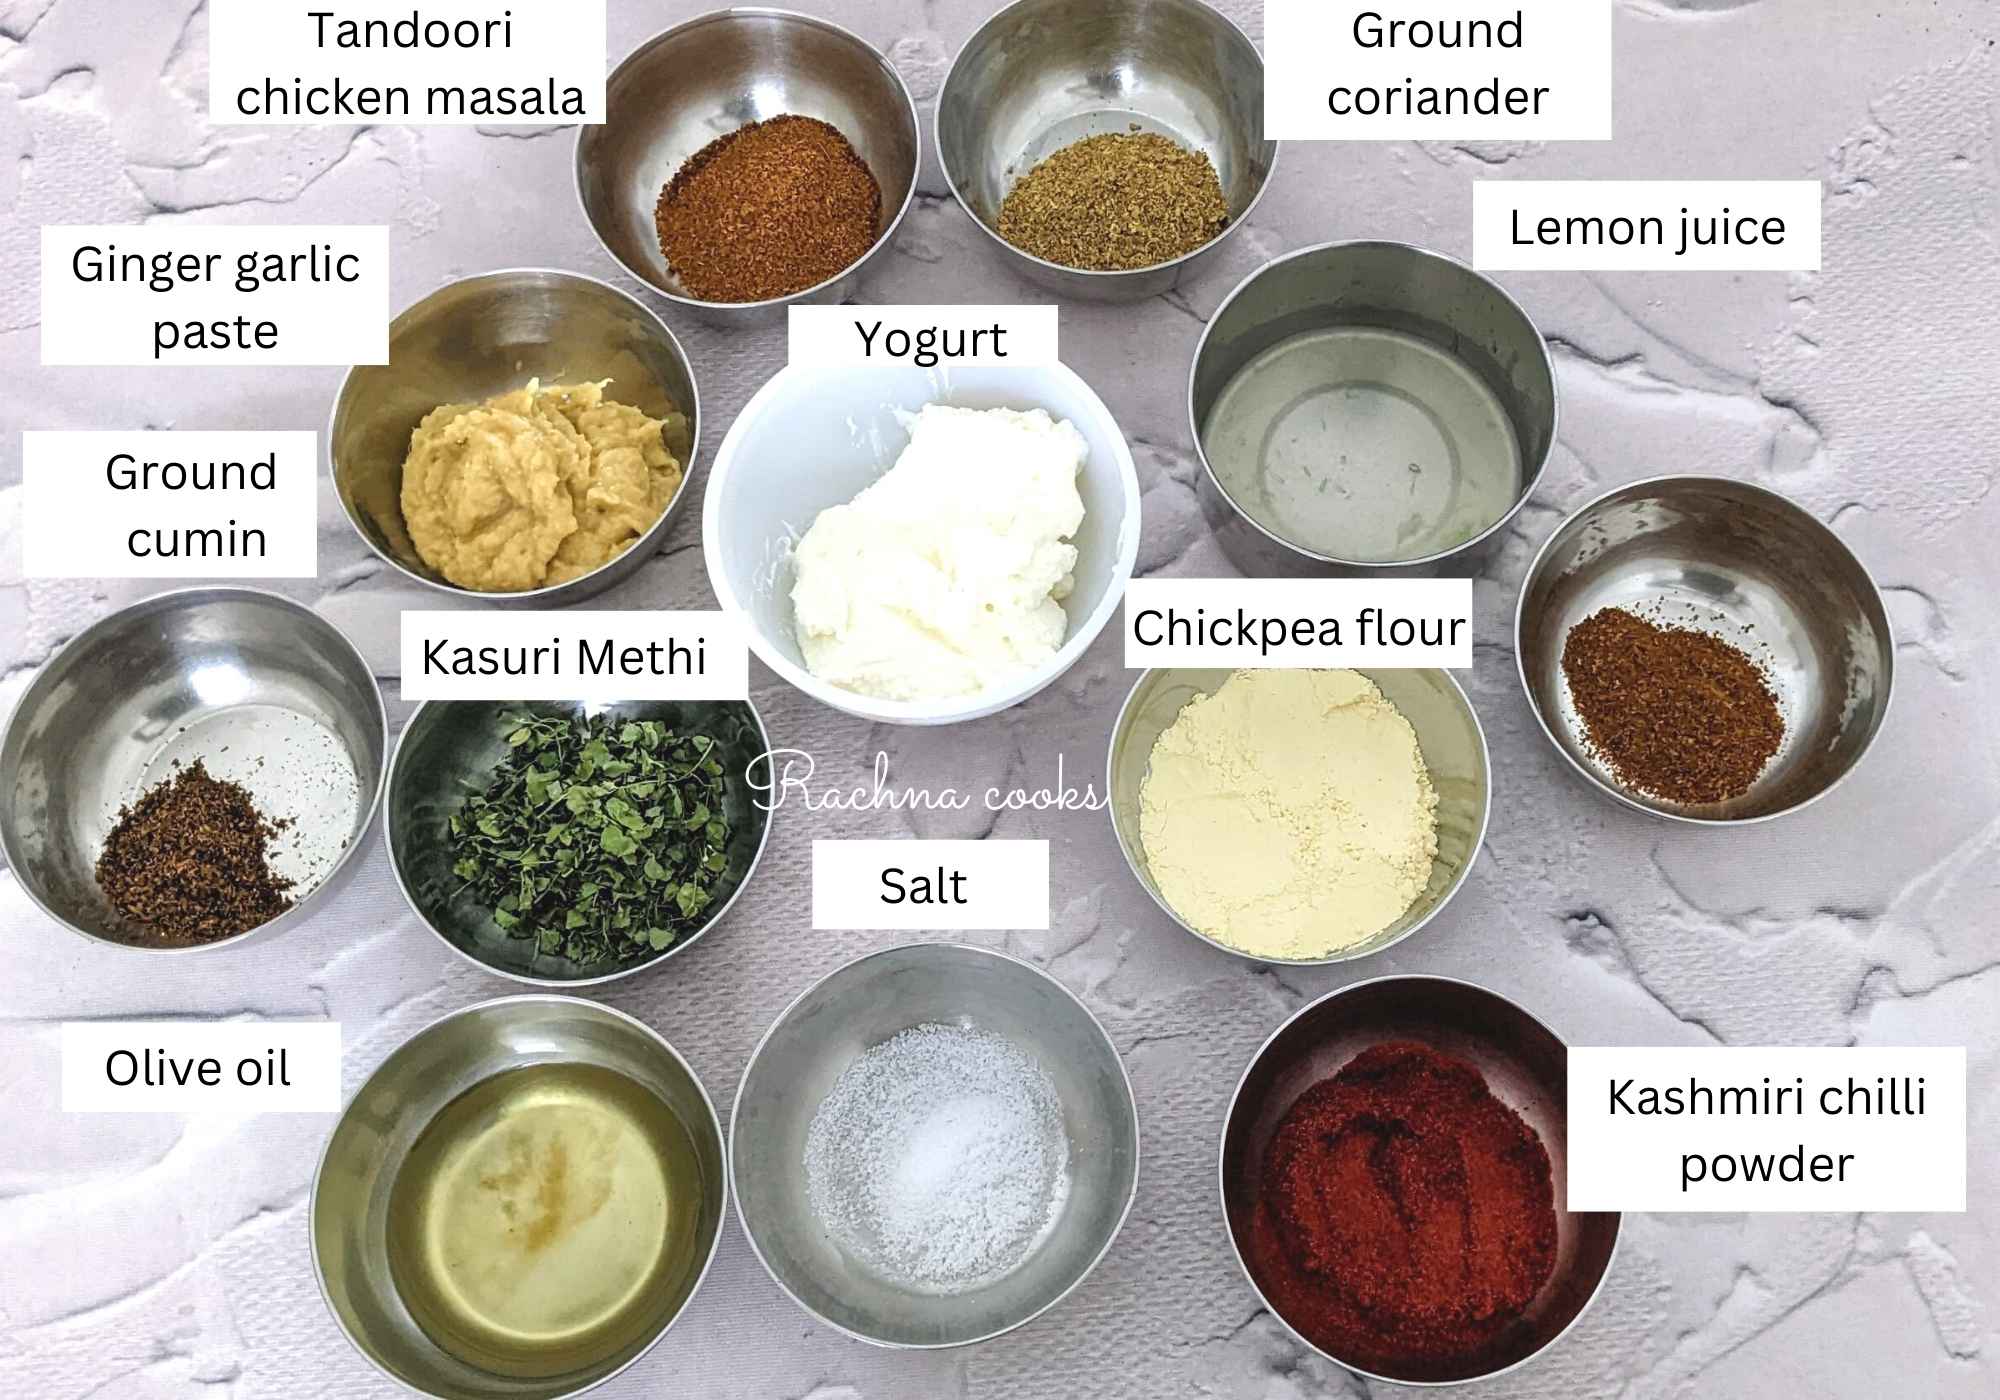 A flat lay showing the ingredients for the tandoori marinade